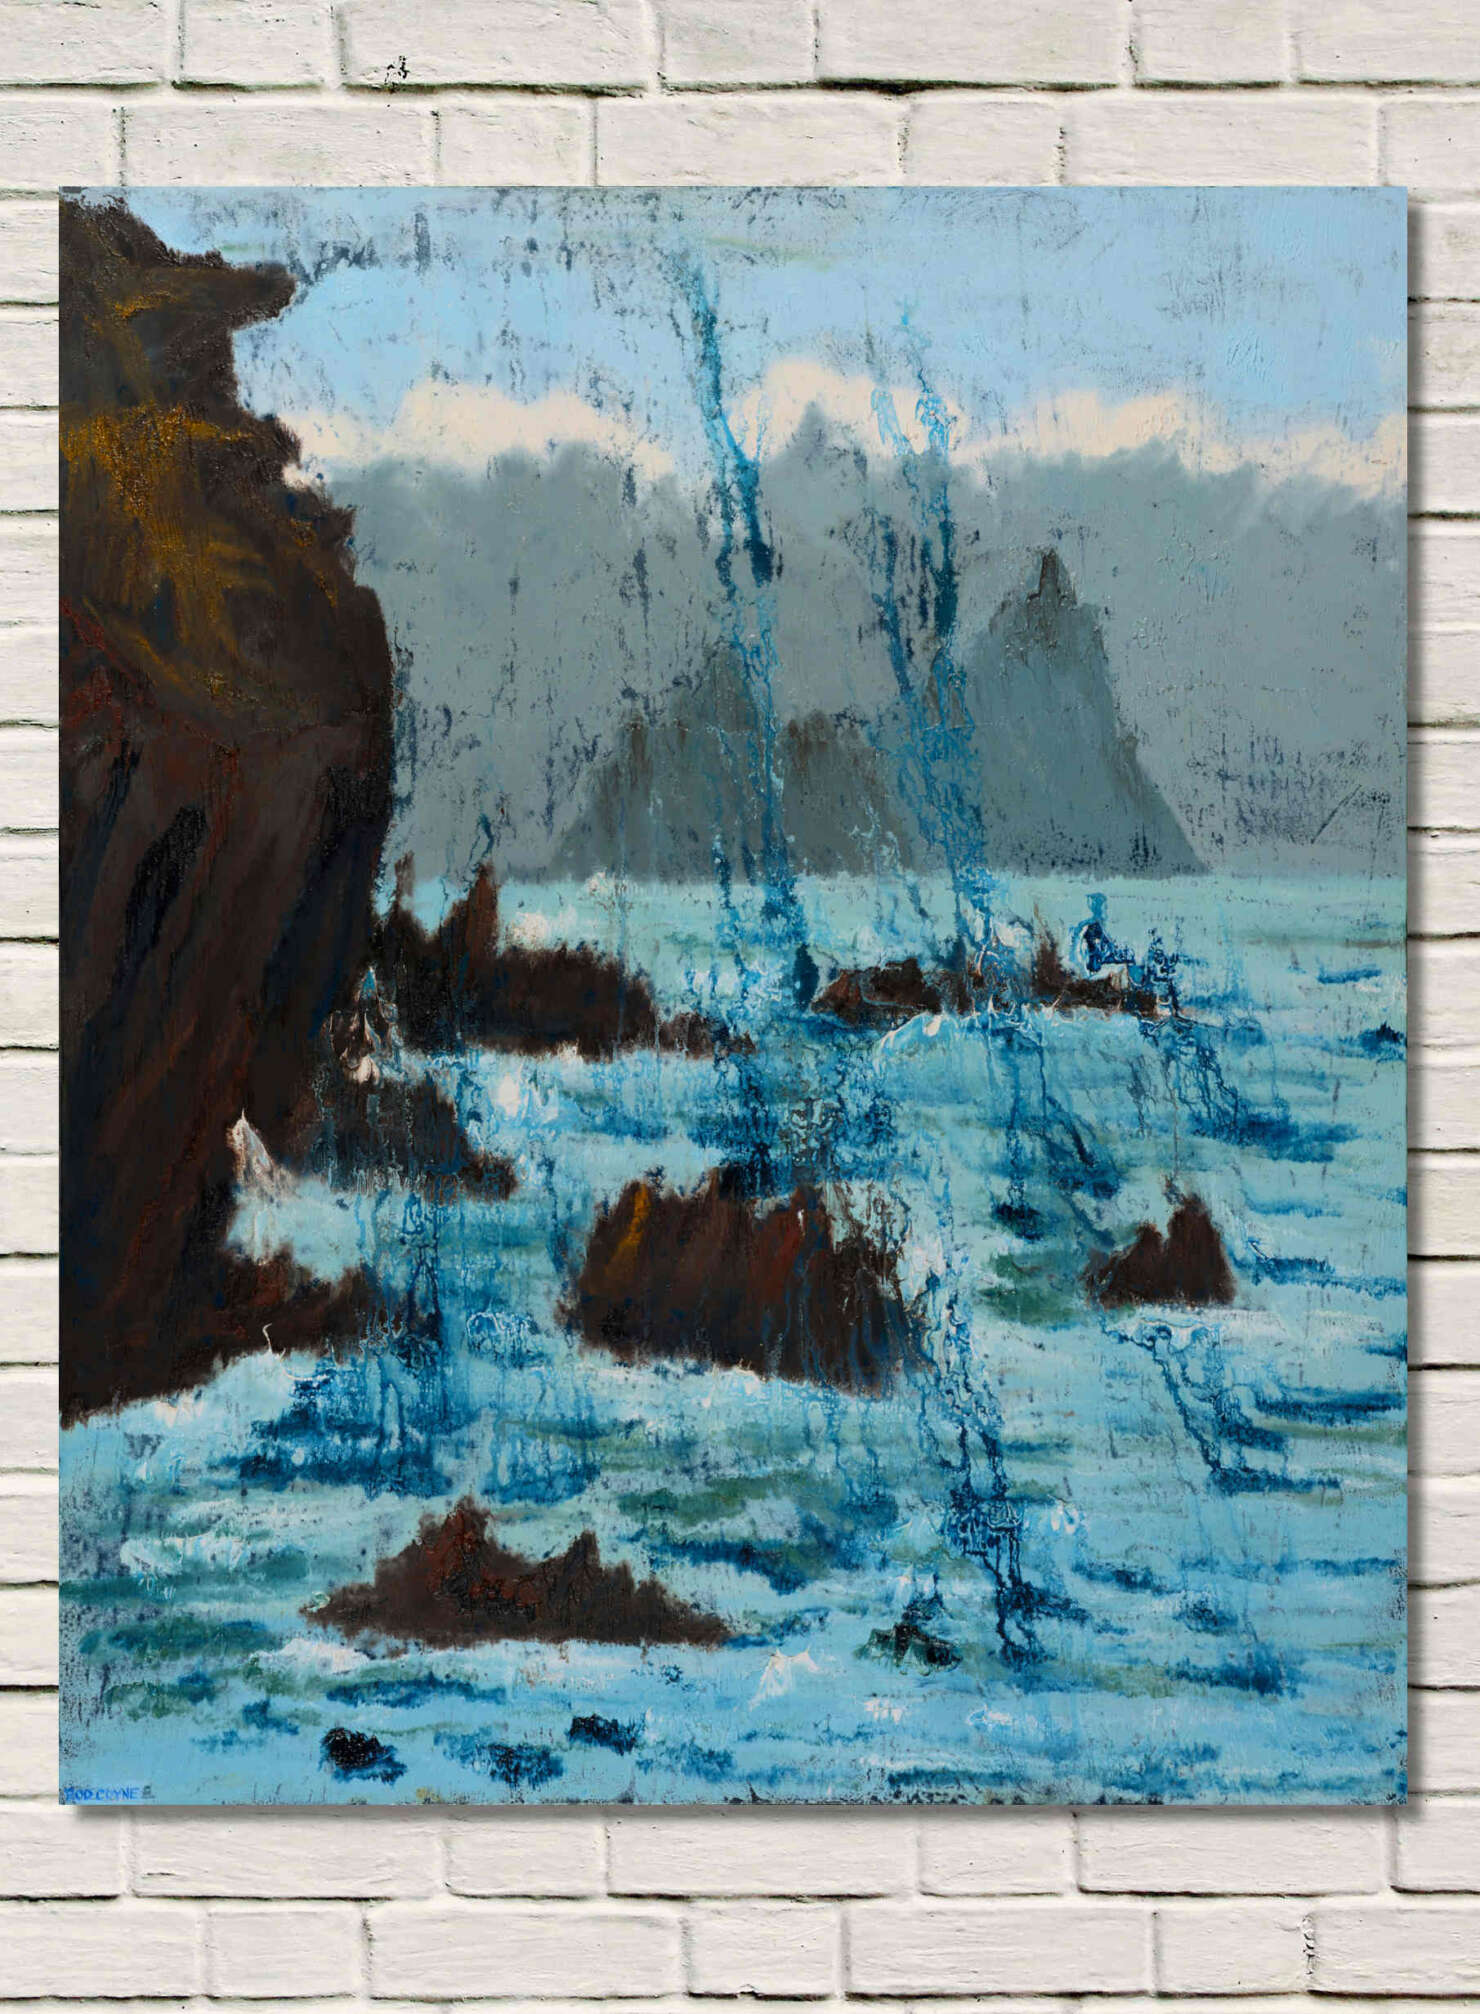 artist rod coyne's painting "island cathedral" is shown here on a white brick wall.